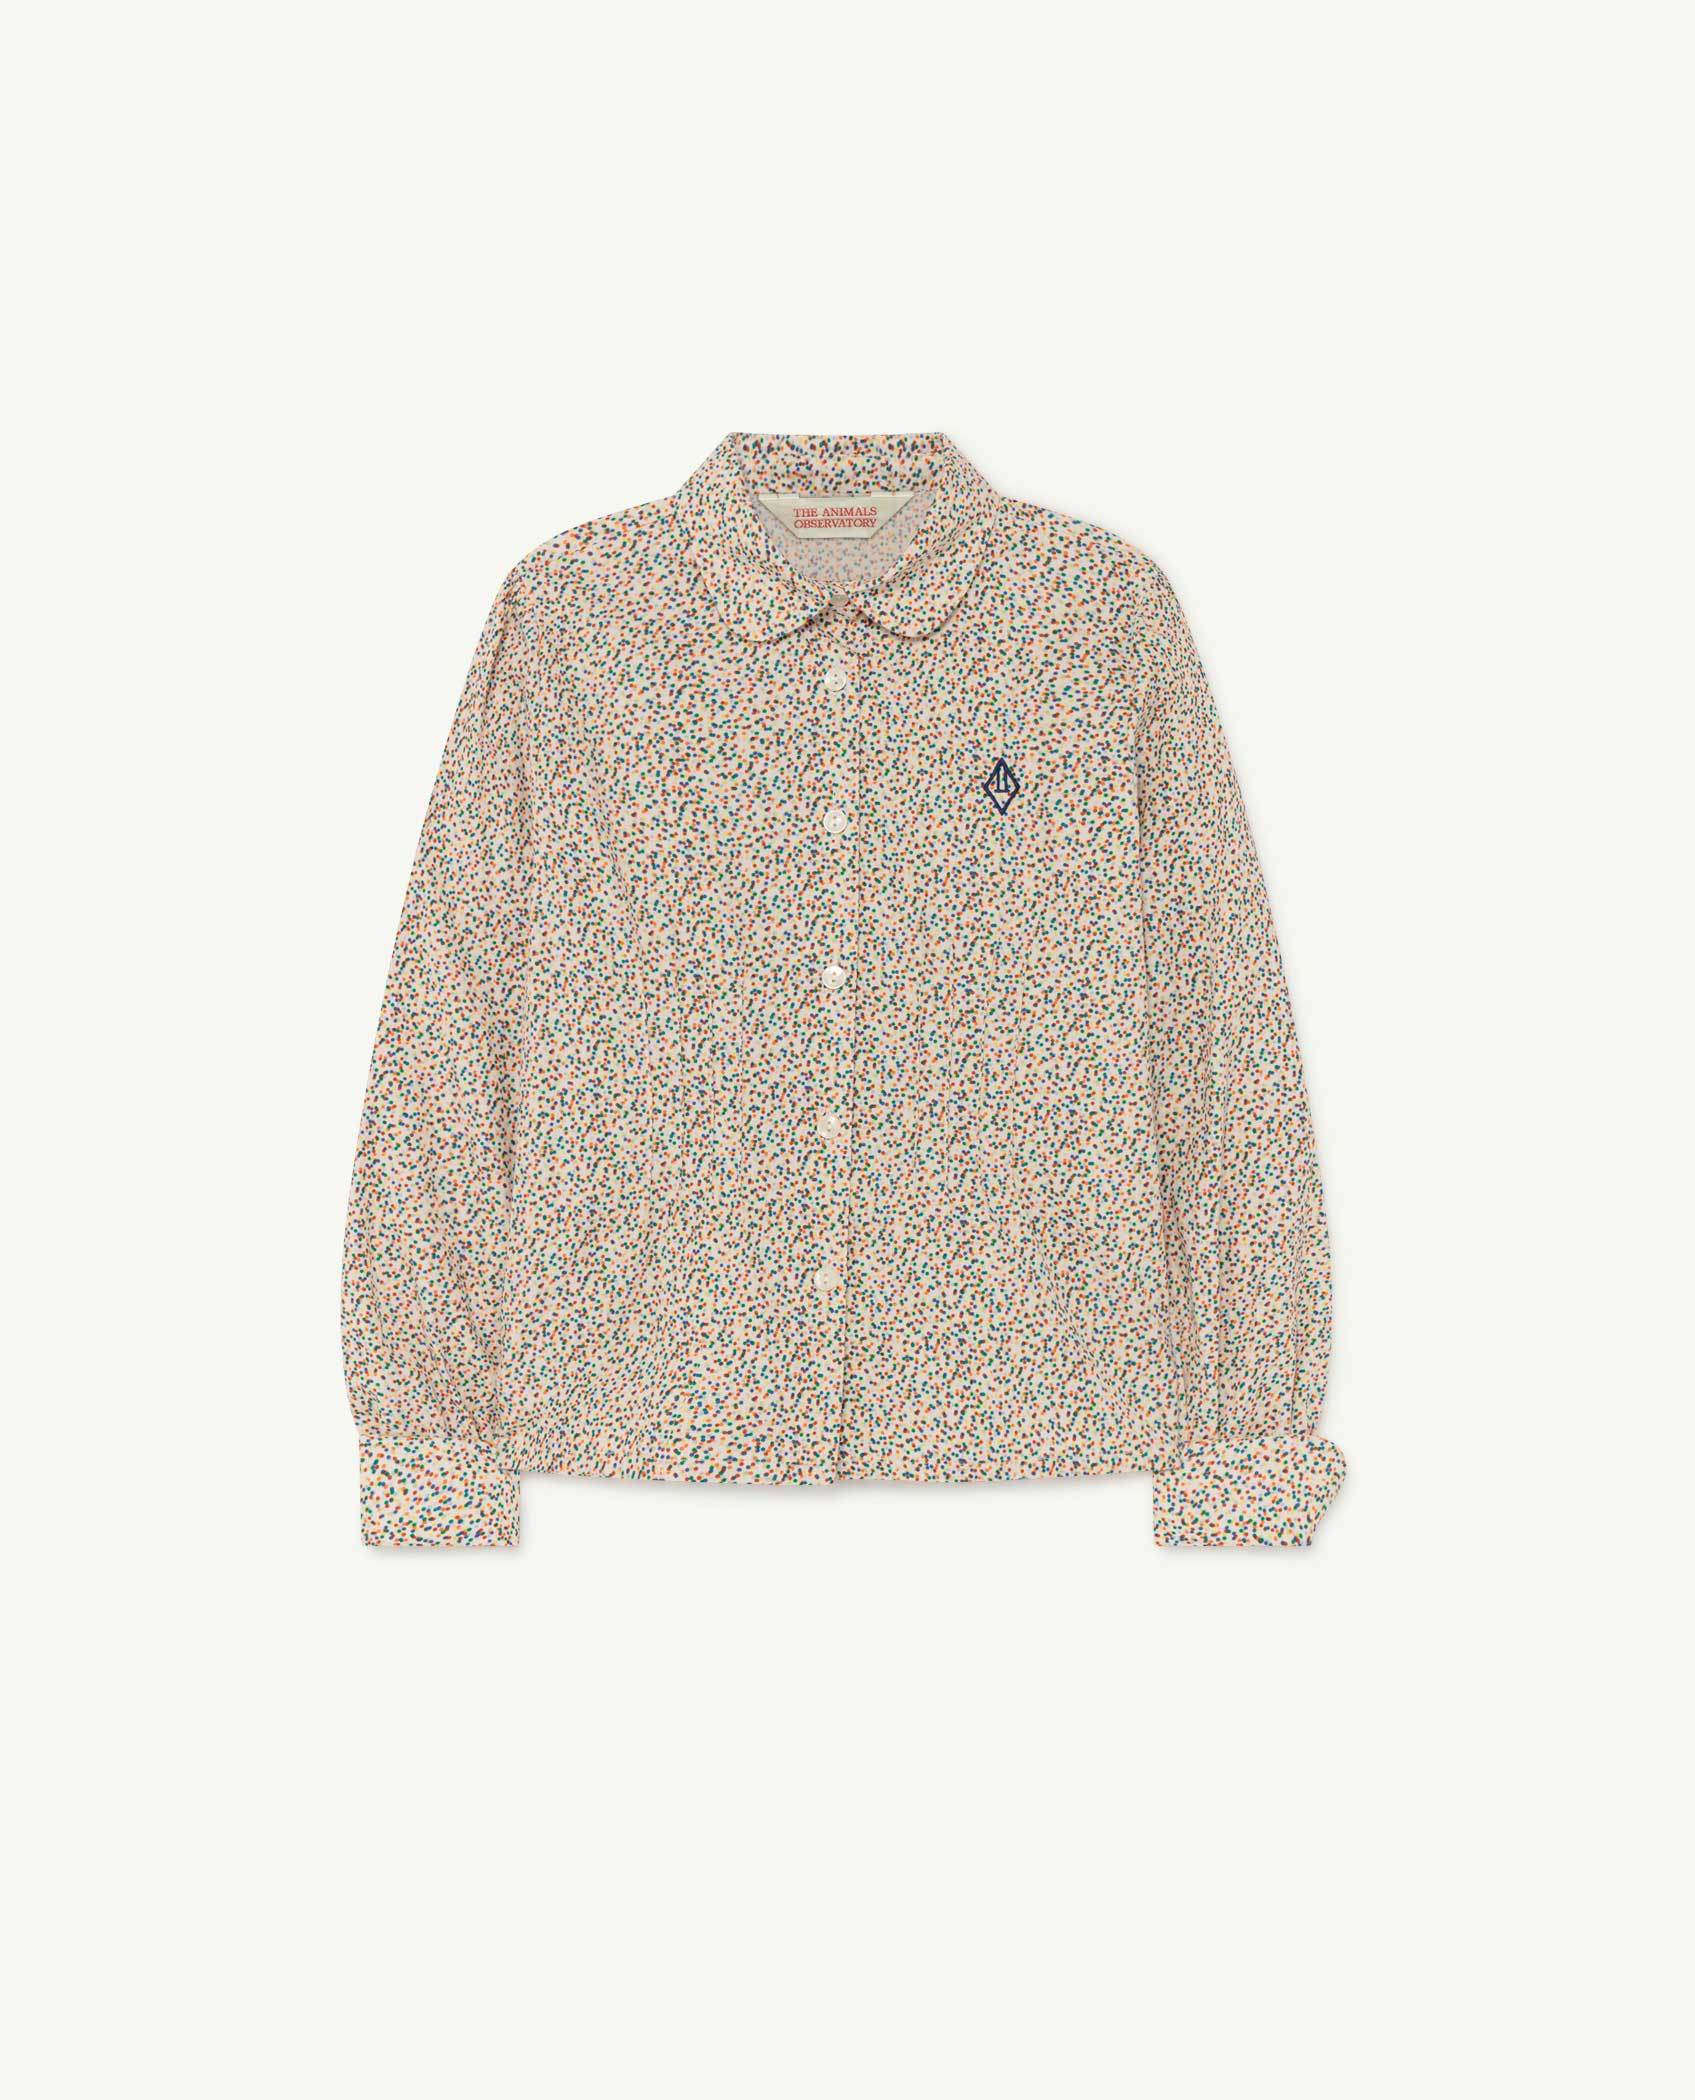 White Dots Canary Shirt PRODUCT FRONT